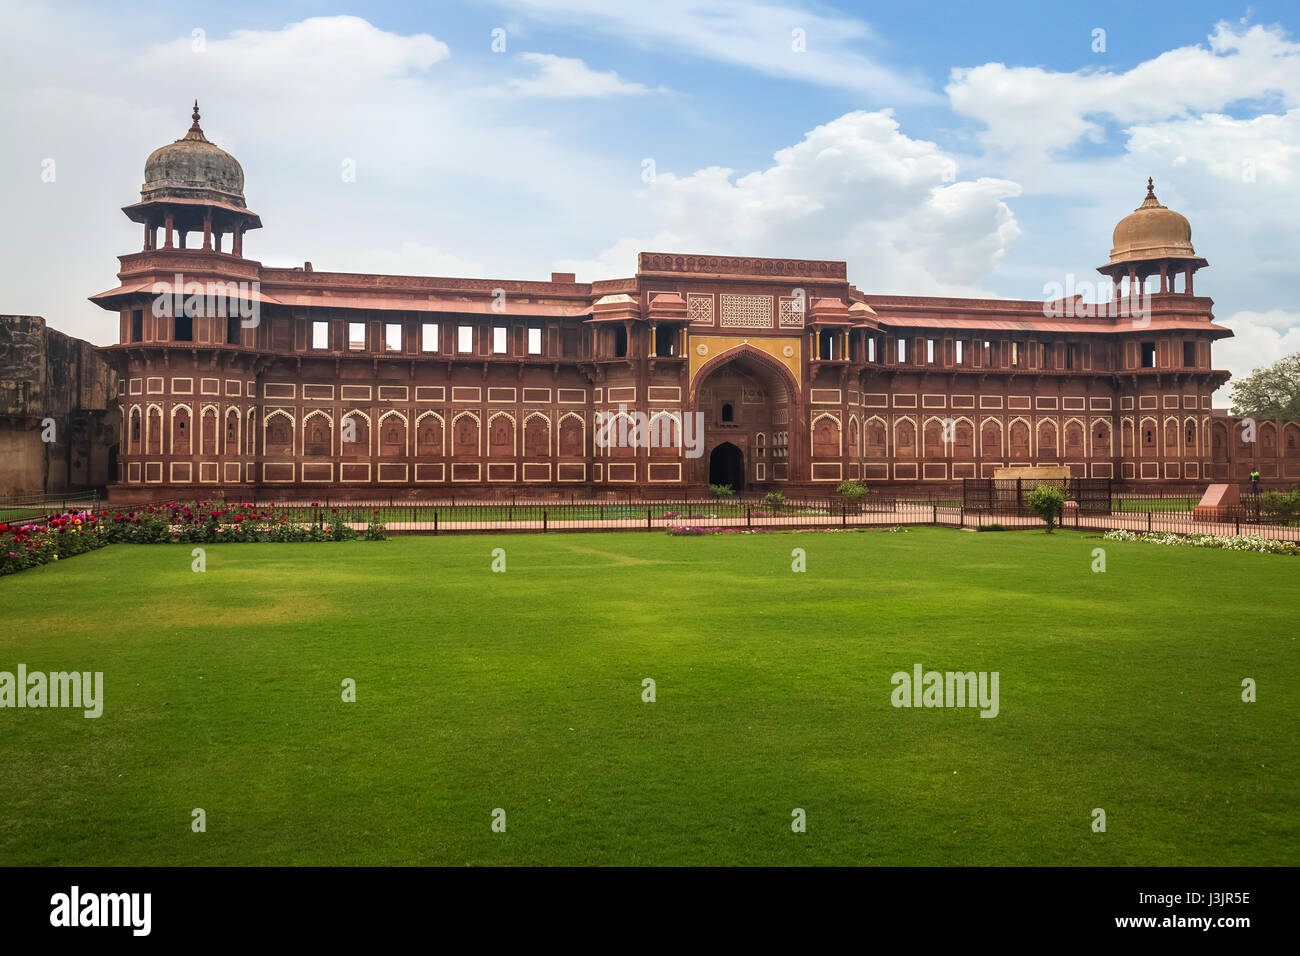 Royal palace inside Agra Fort. Agra Fort built in Mughal Indian architecture style has been designated as a UNESCO World Heritage site. Stock Photo